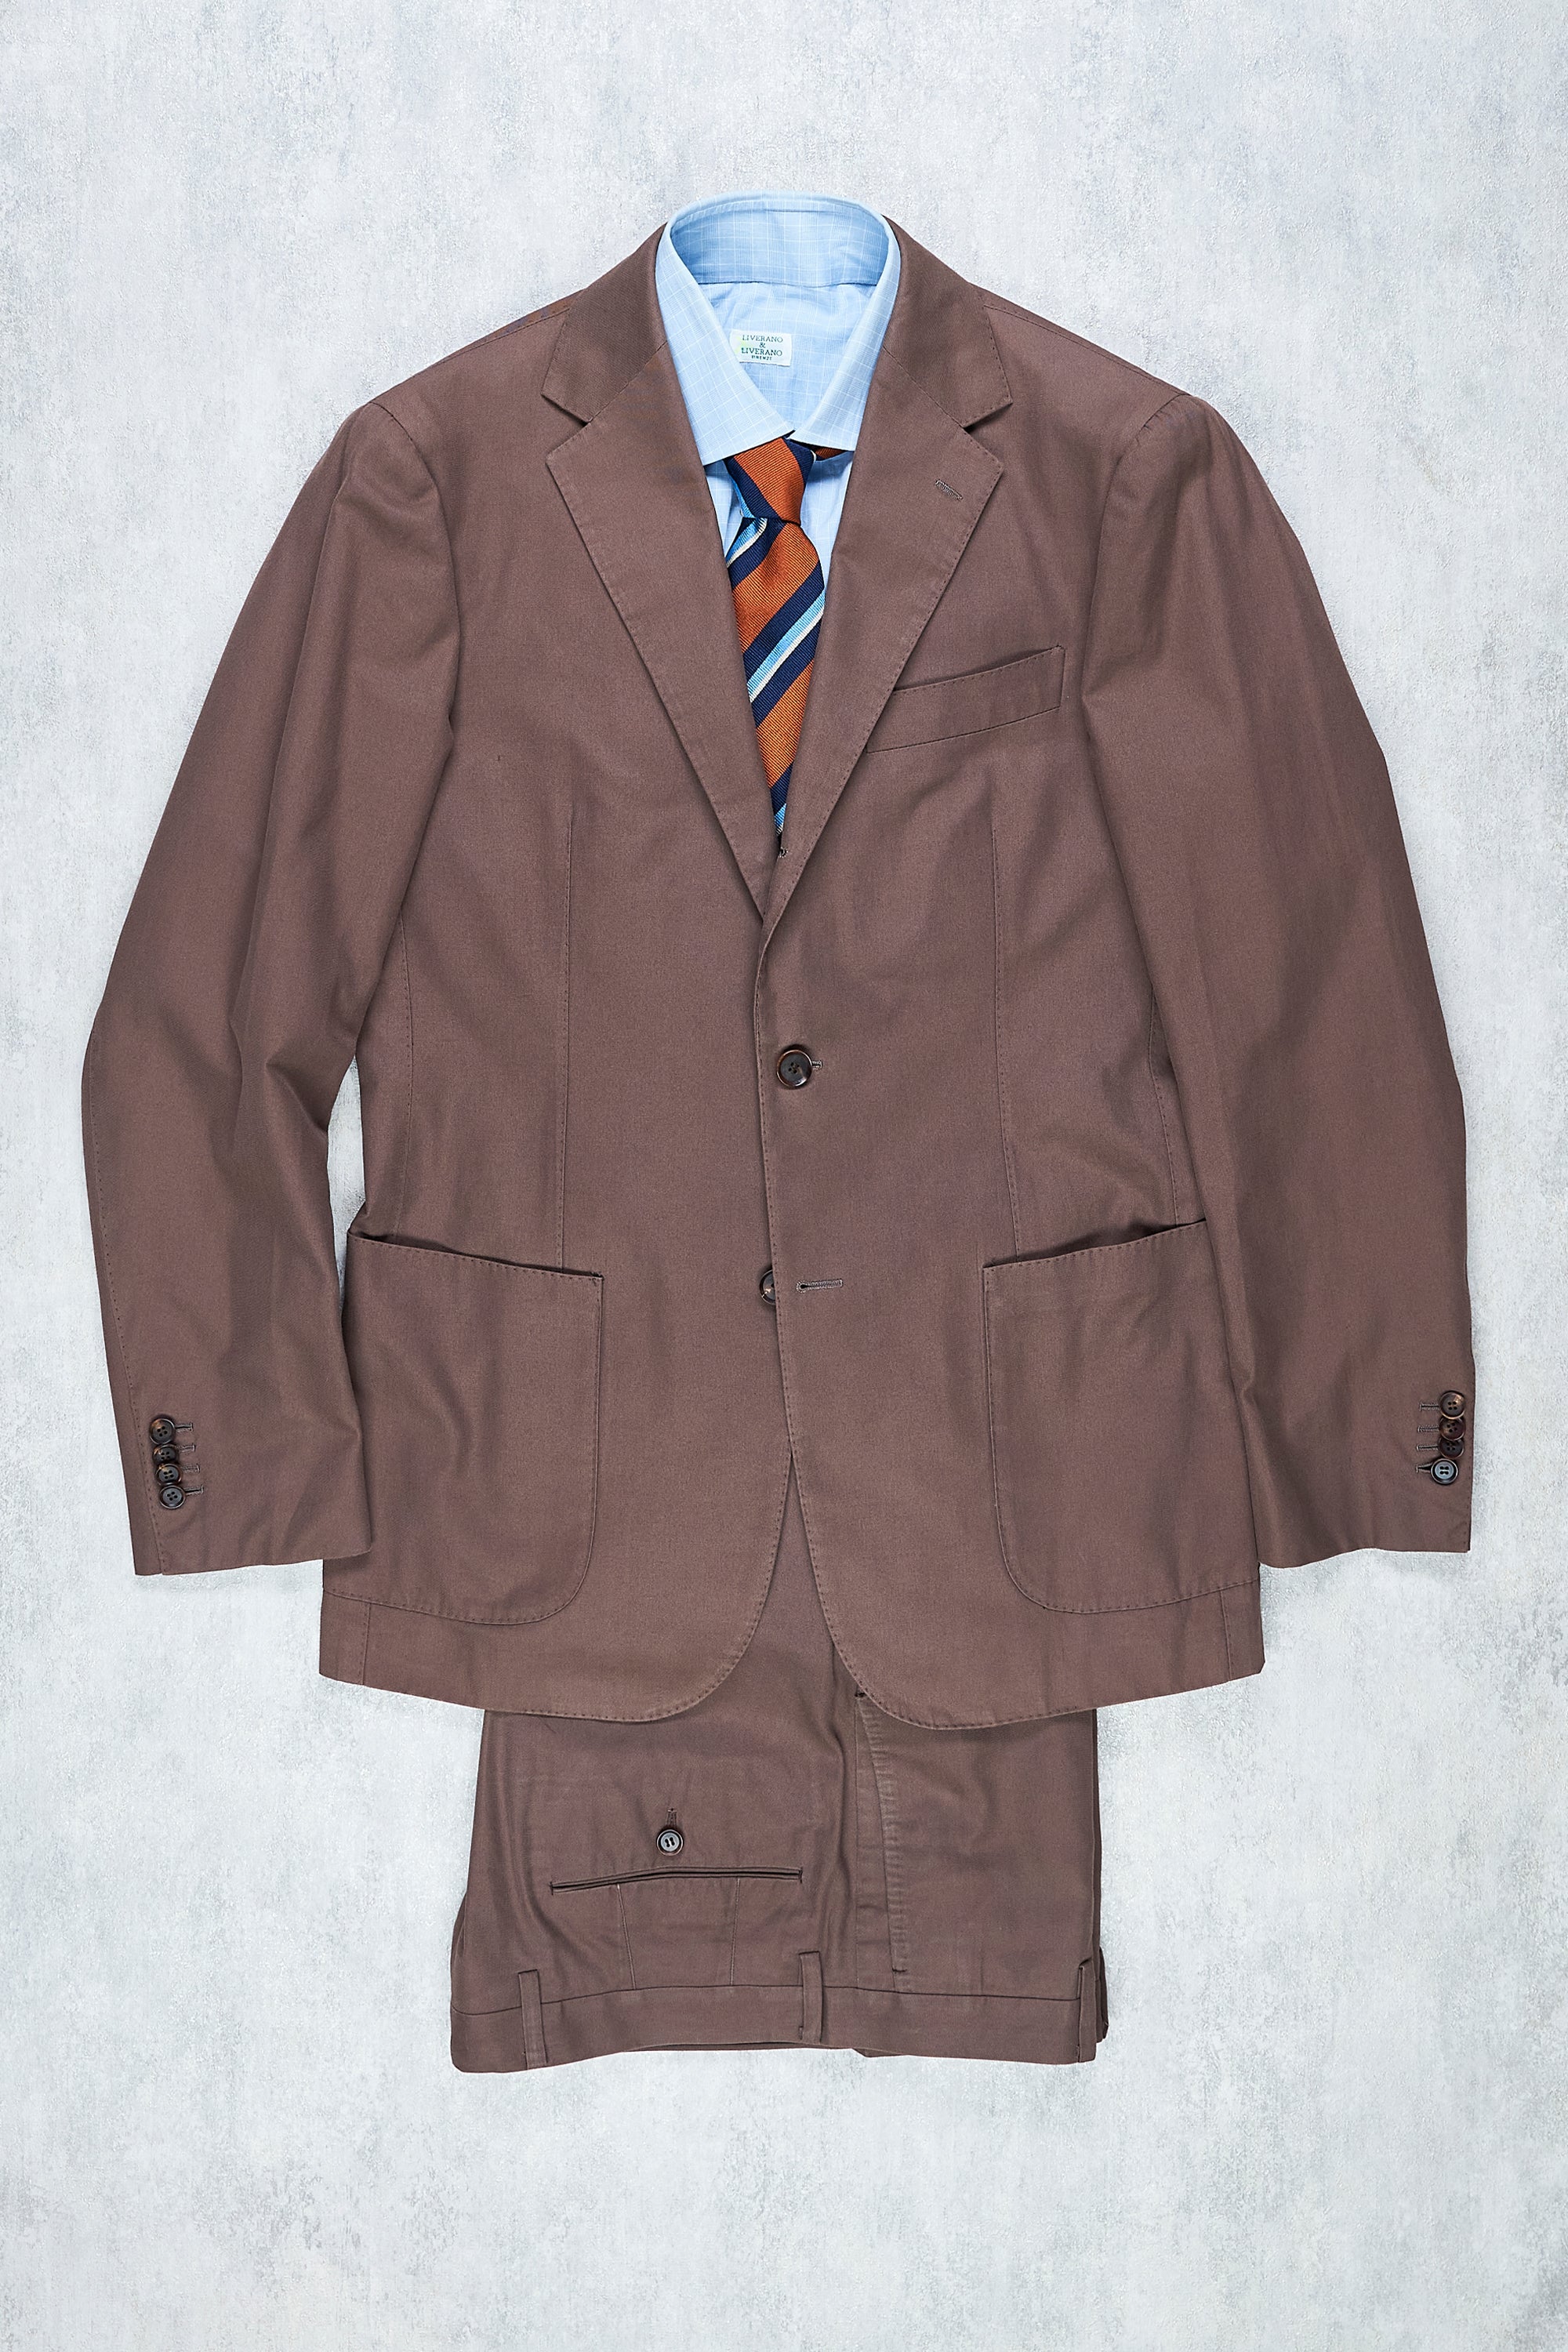 Ring Jacket Meister Light Brown Smooth Cotton Suit